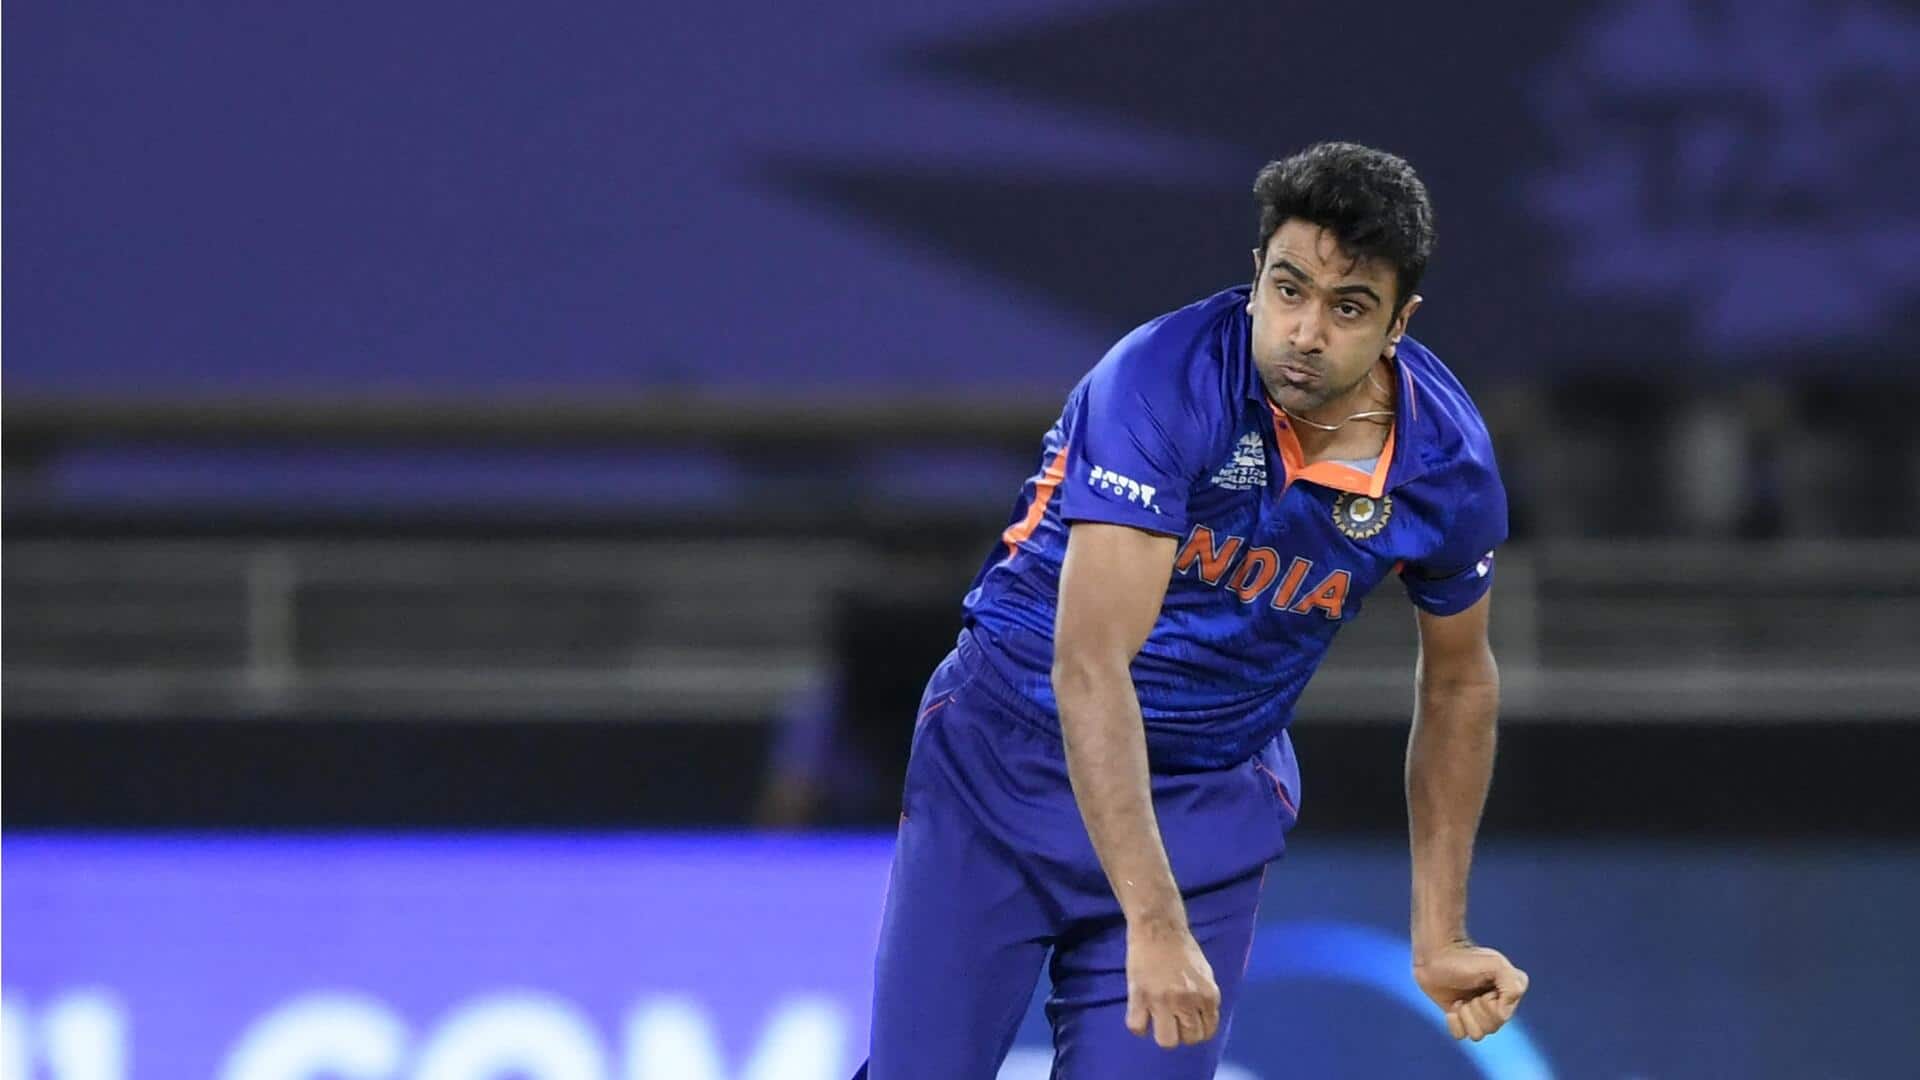 Ashwin vs Sundar: Who adds more value to WC squad?